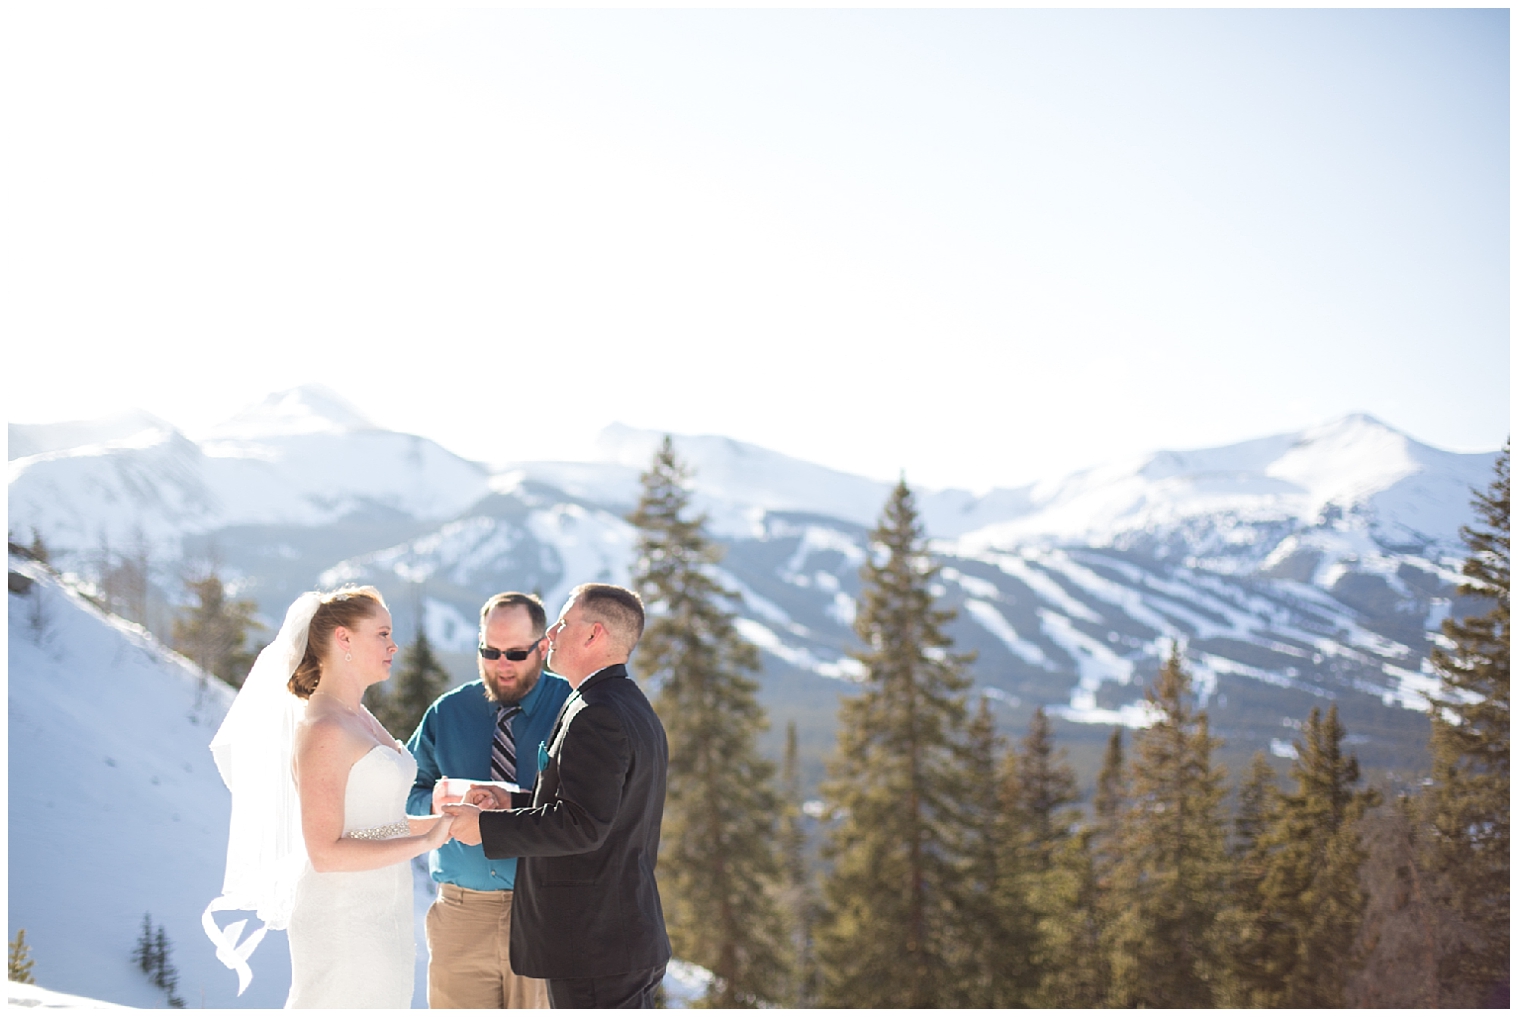 The wedding couple read vows to each other at their Boreas Pass elopement.